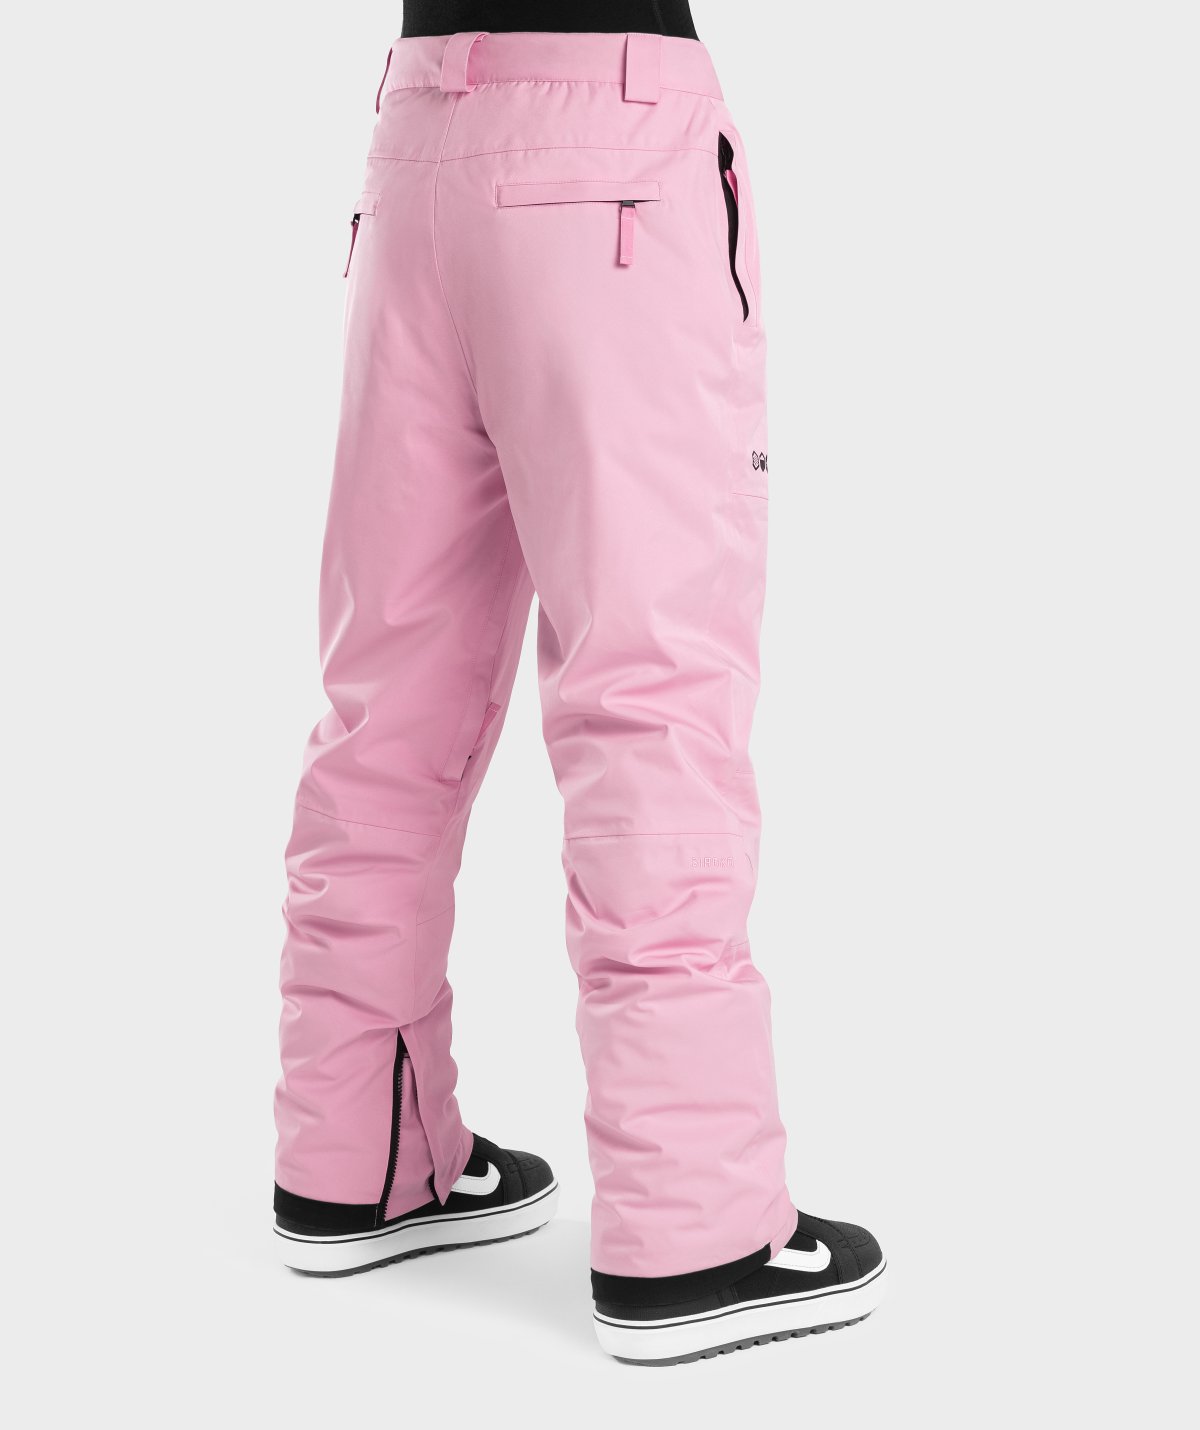 No Fear - Skiing Snowboarding Trousers Ski Pant Womens Uk 12 White/RiderPink  NEW